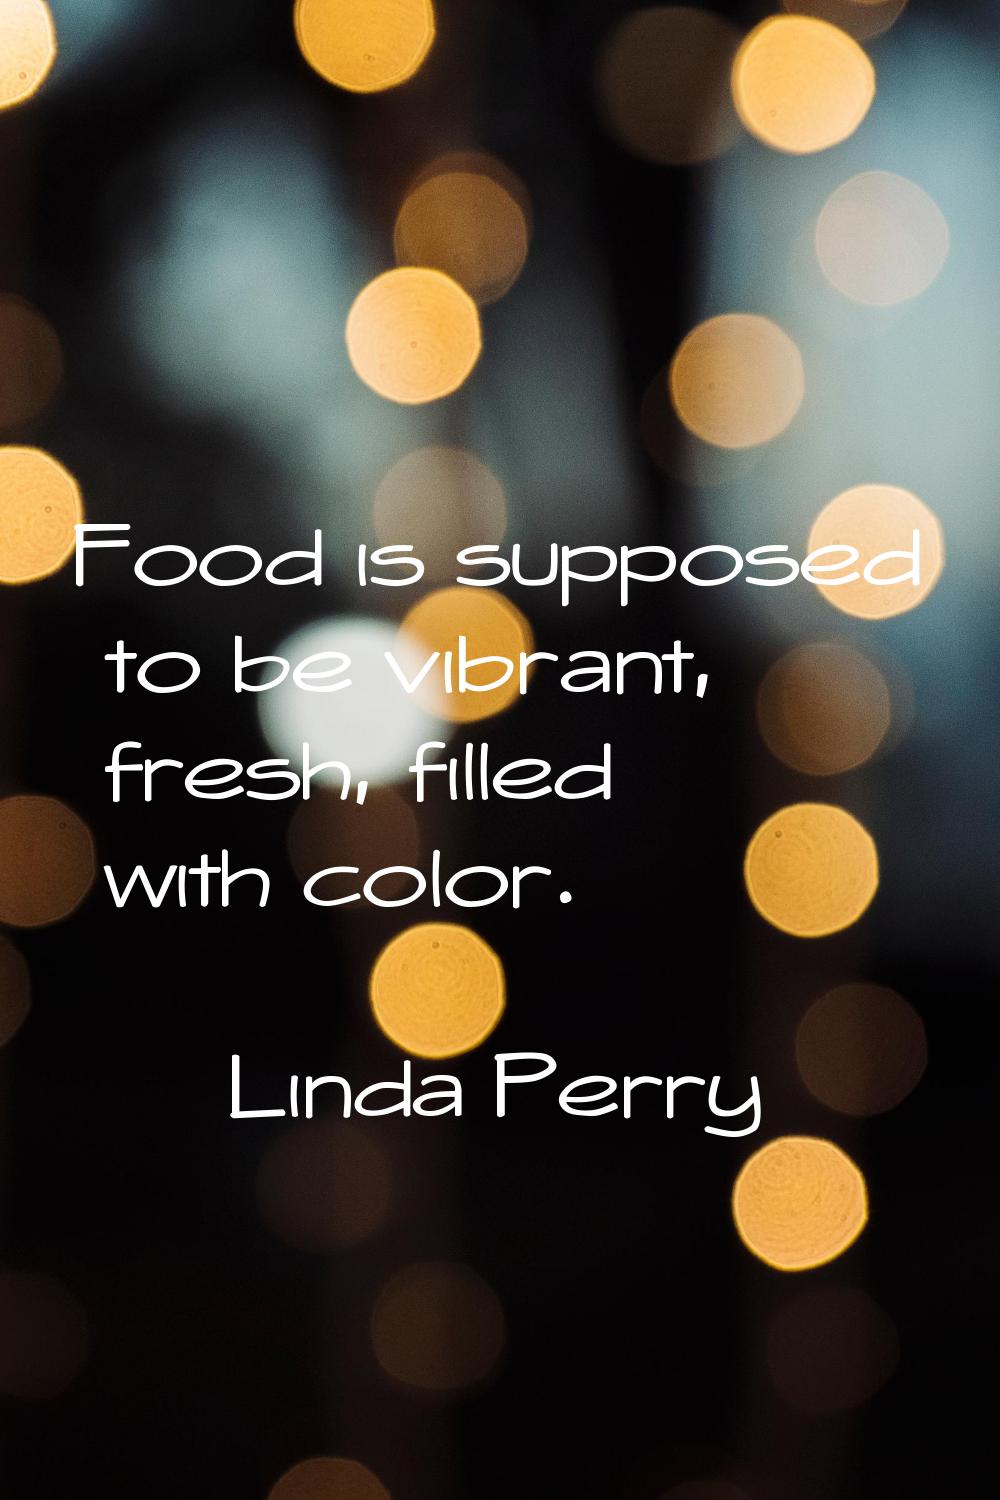 Food is supposed to be vibrant, fresh, filled with color.